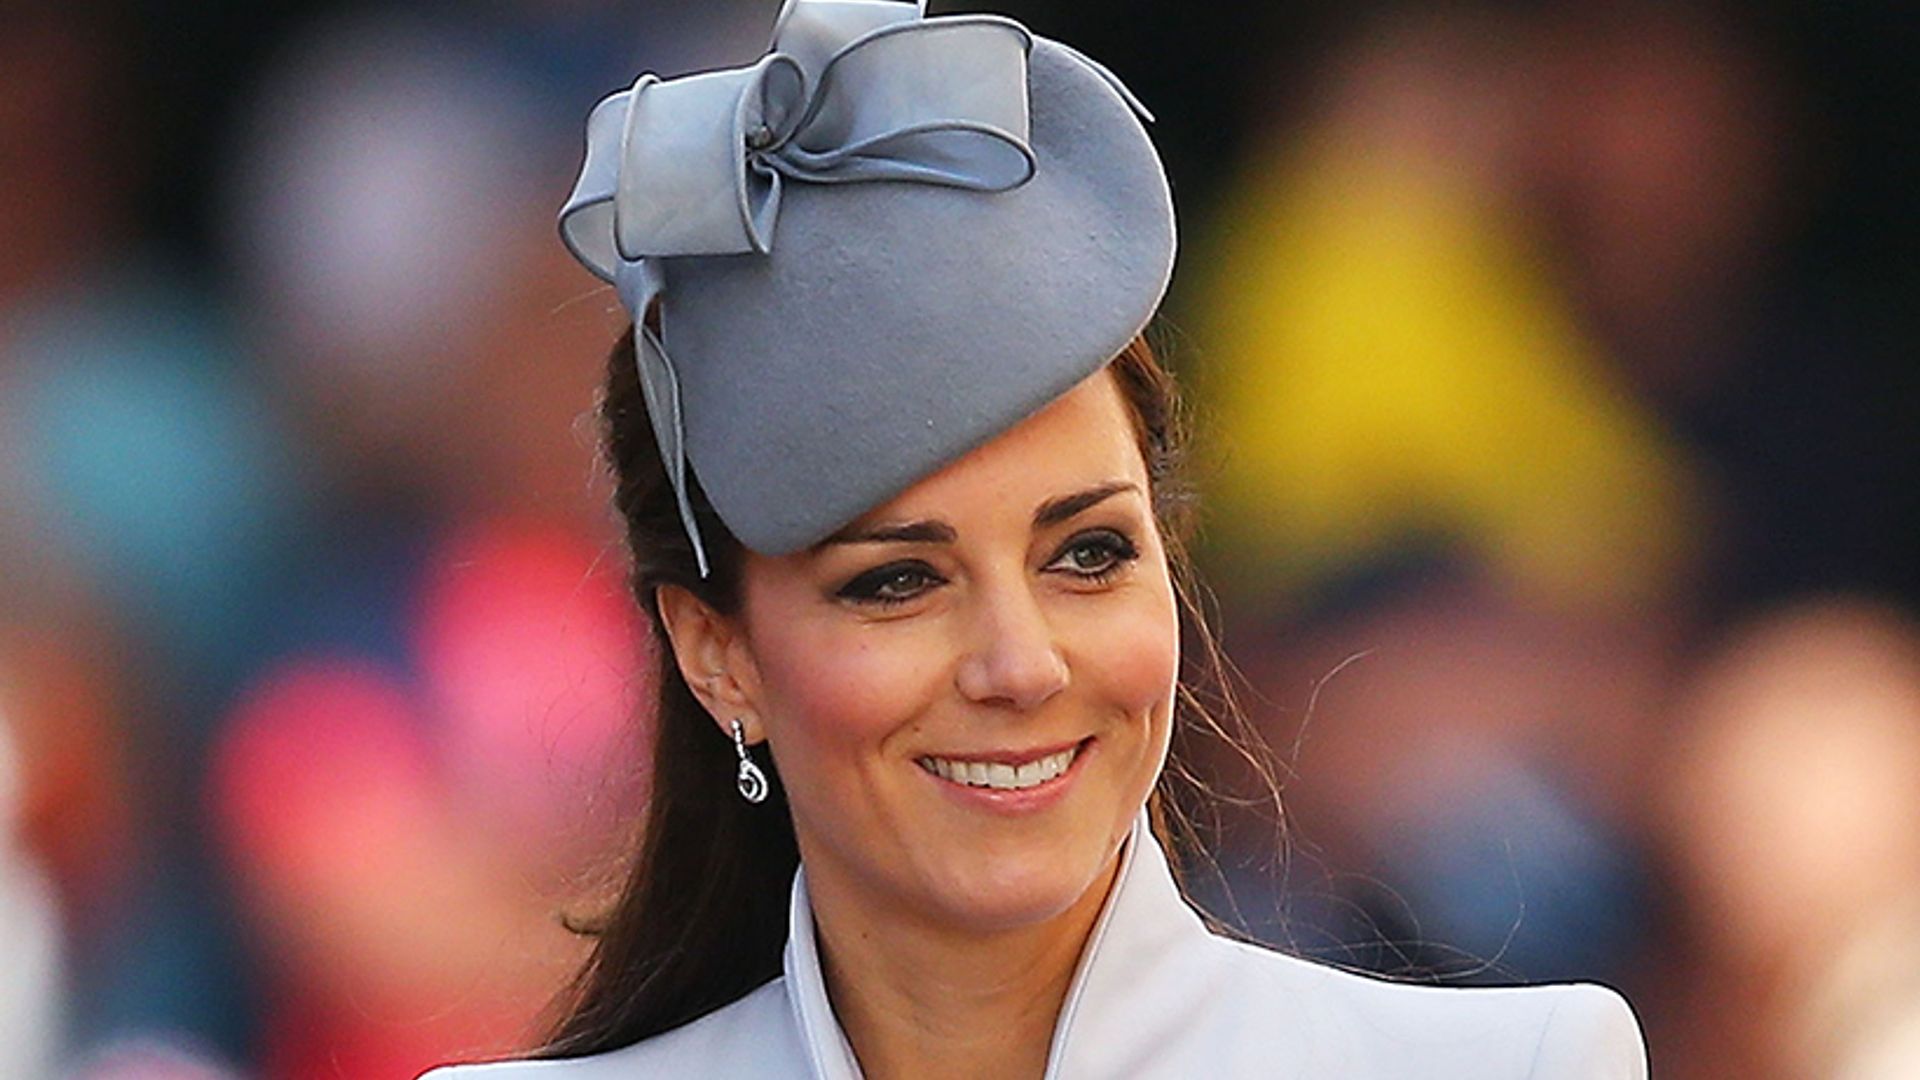 The one item of clothing Kate Middleton has never worn as a royal